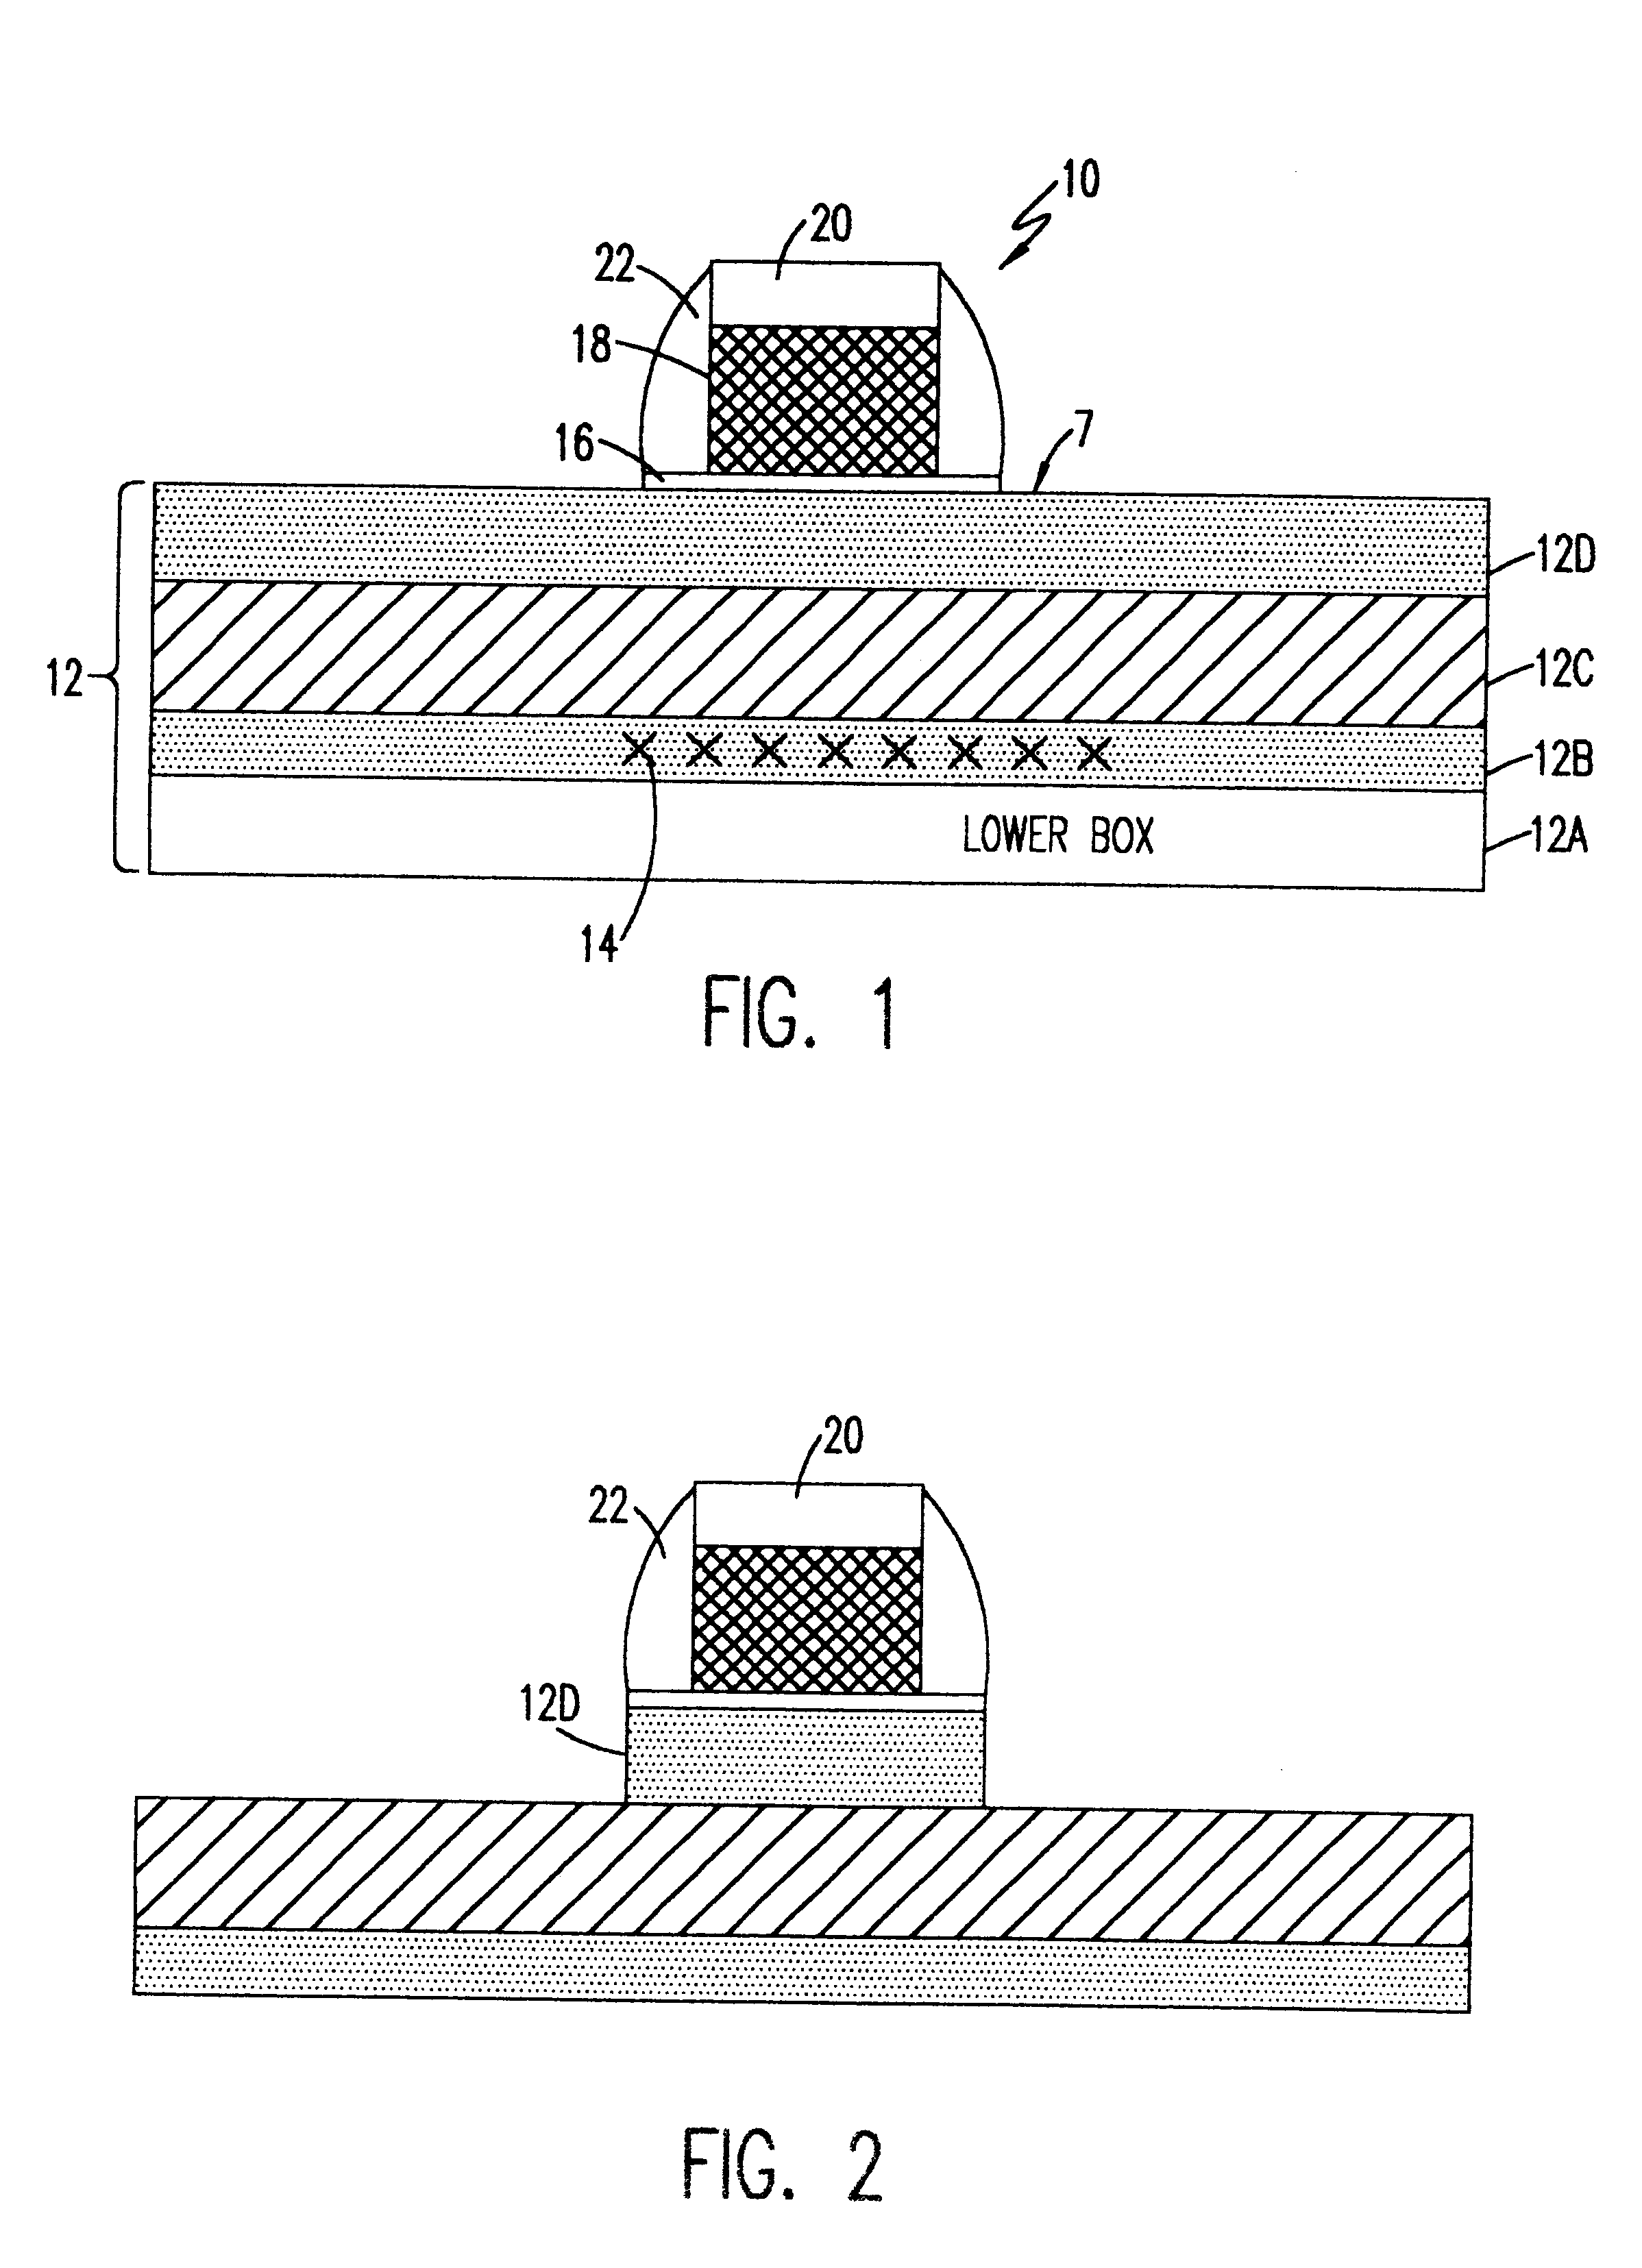 SOI transistor with polysilicon seed